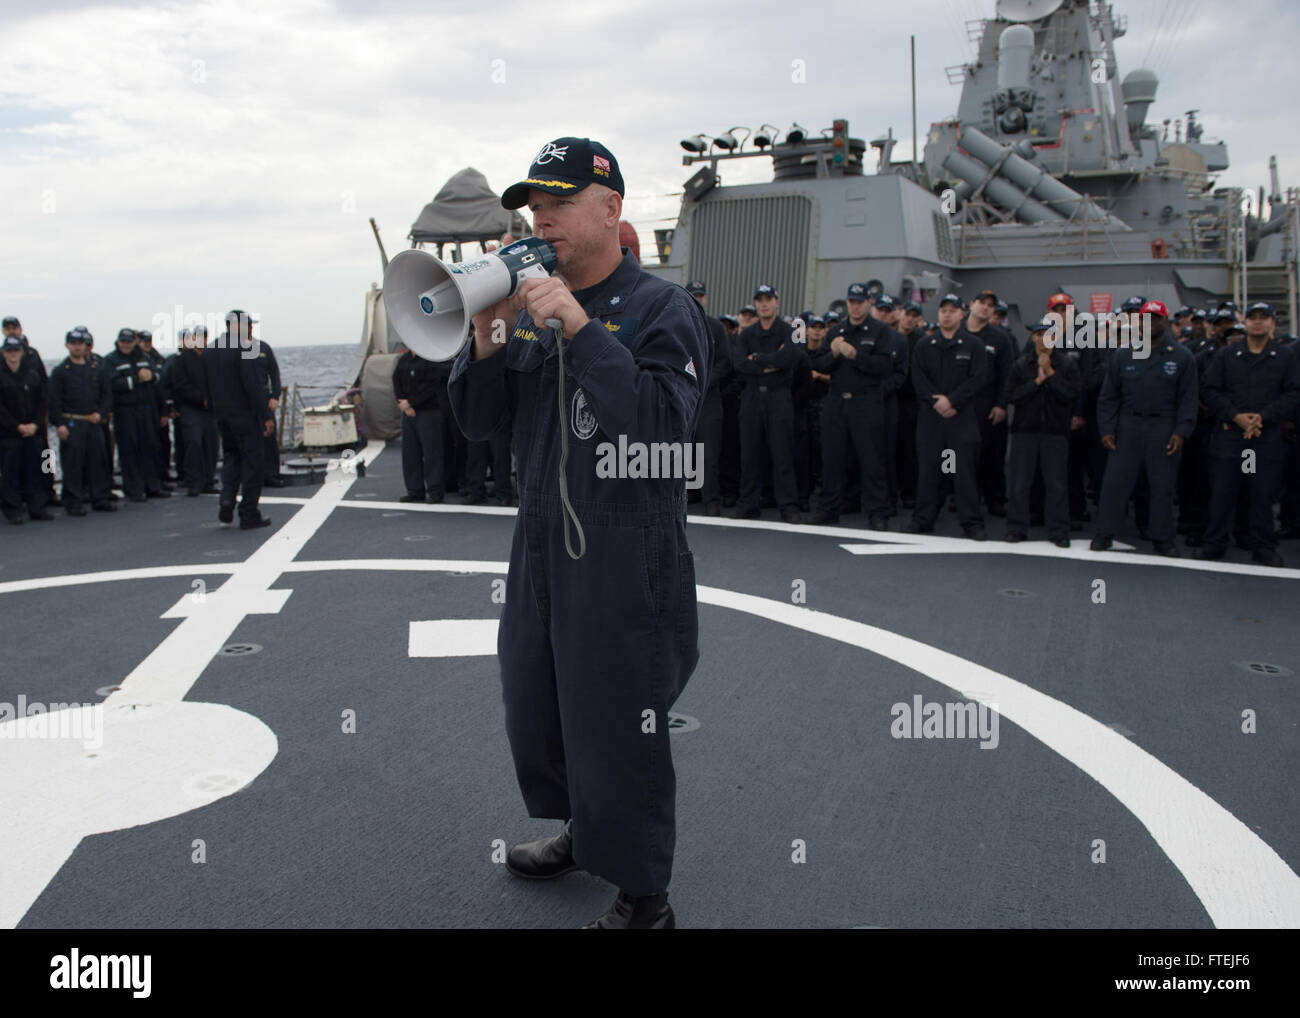 MEDITERRANEAN SEA (Dec. 01, 2014) Cmdr. Charles Hampton, USS Donald Cook (DDG 75) commanding officer, congratulates newly-promoted petty officers following a  frocking ceremony aboard the ship’s flight deck Dec. 1, 2014. Donald Cook, an Arleigh Burke-class guided-missile destroyer, forward-deployed to Rota, Spain, is conducting naval operations in the U.S. 6th Fleet area of operations in support of U.S. national security interests in Europe. Stock Photo